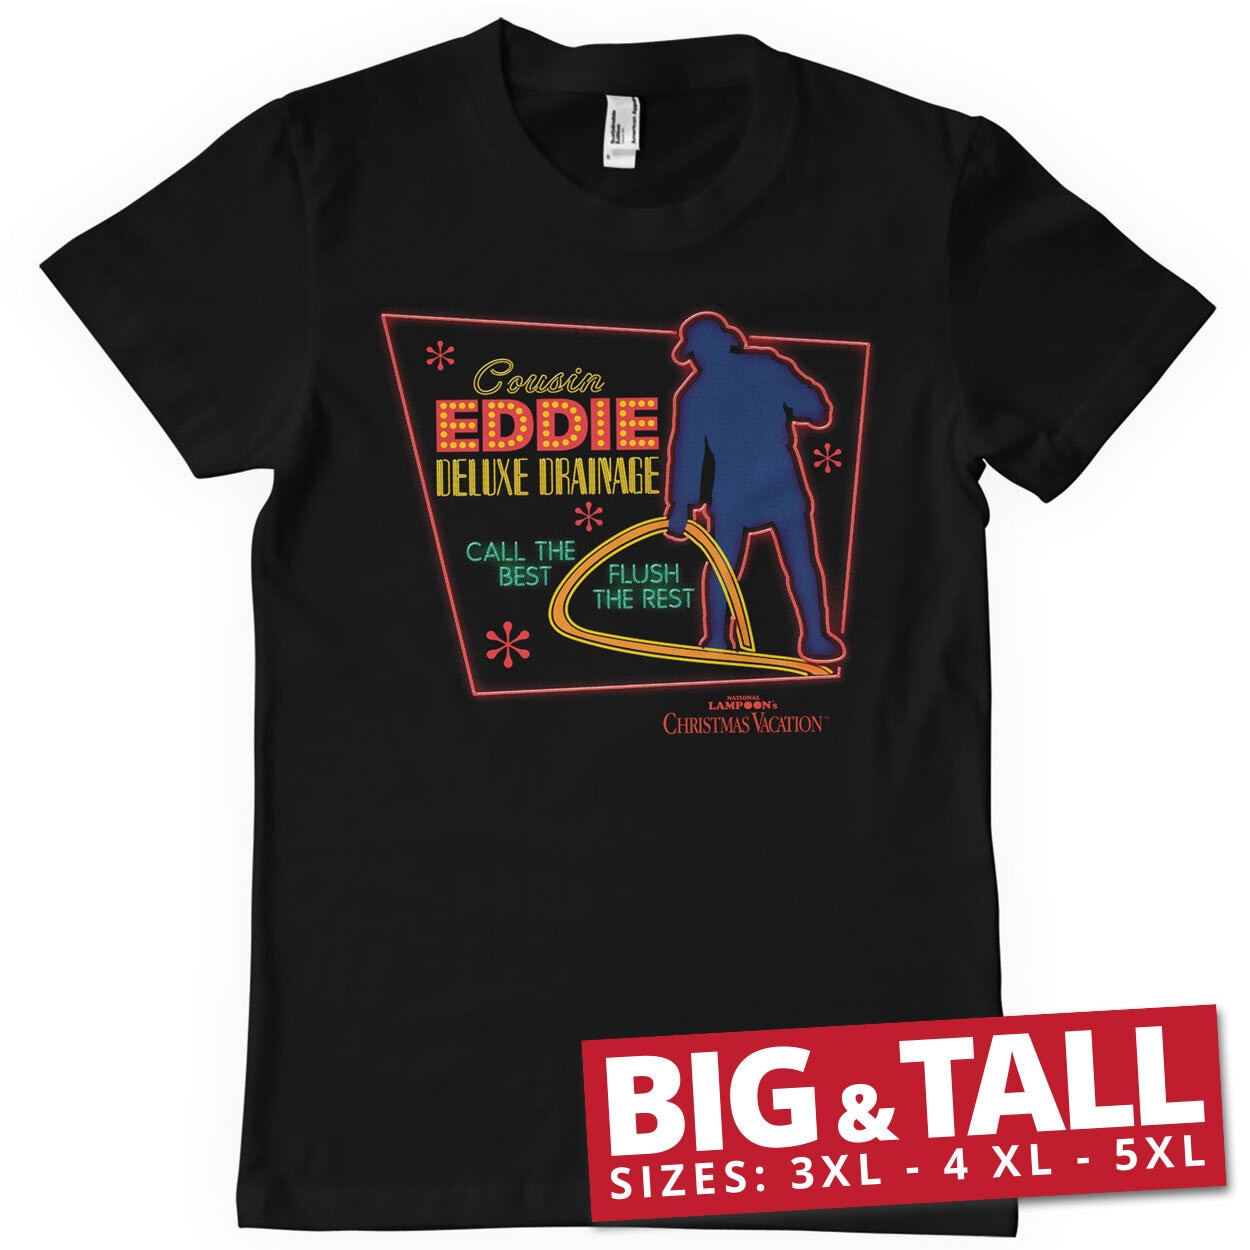 Cousin Eddie Deluxe Drainage Big & Tall T-Shirt